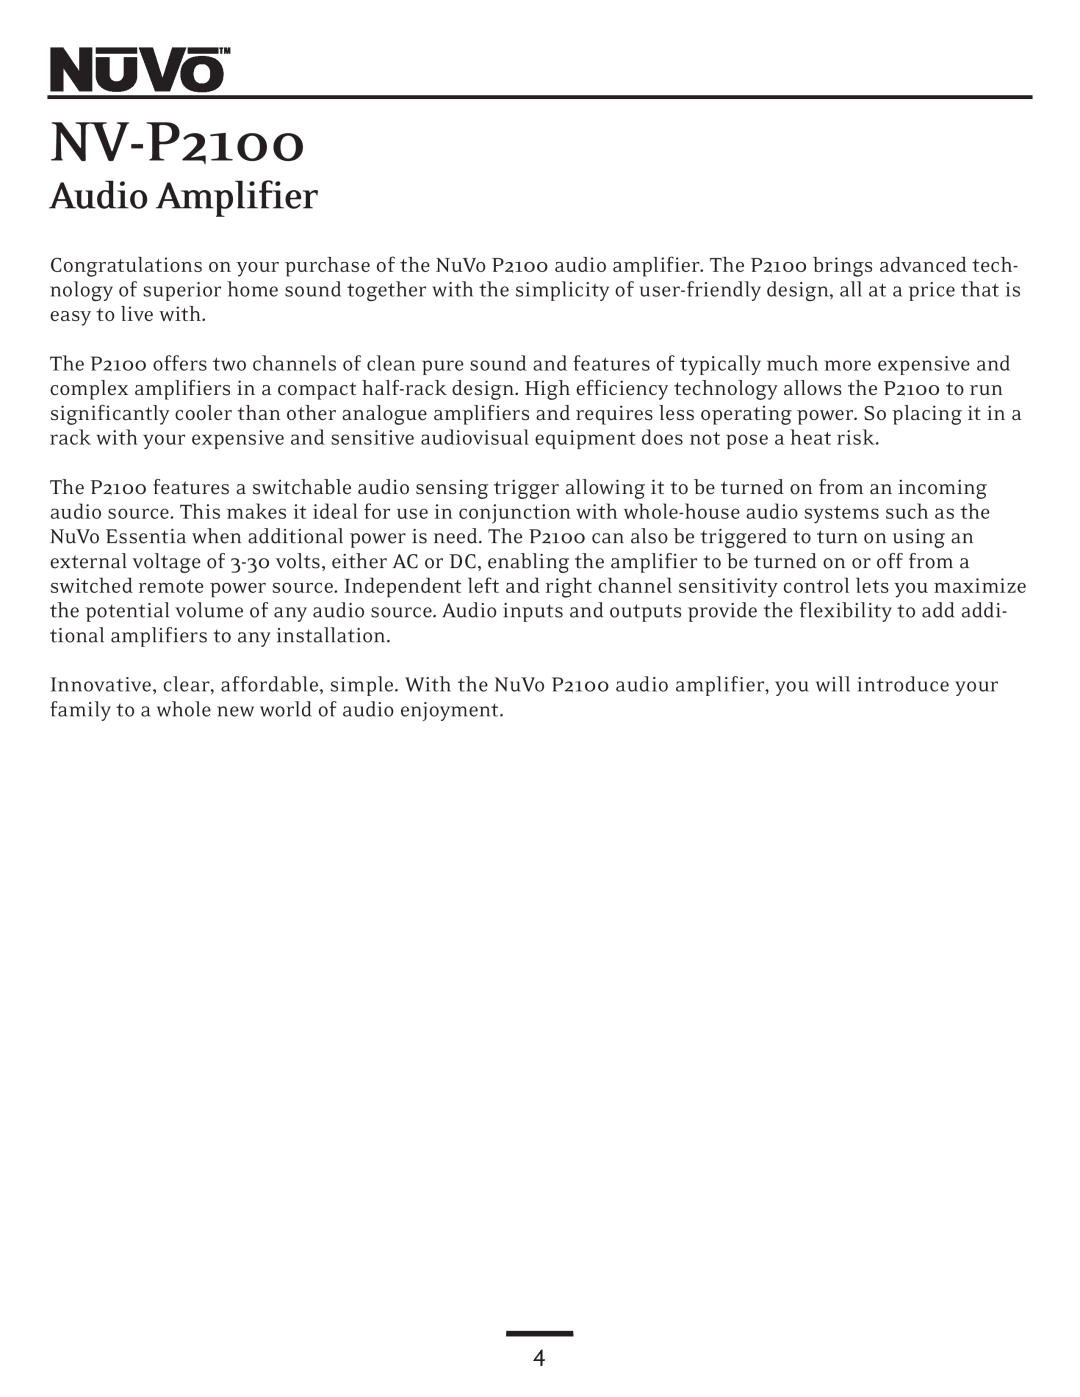 Nuvo NV-P2100 owner manual Audio Amplifier 